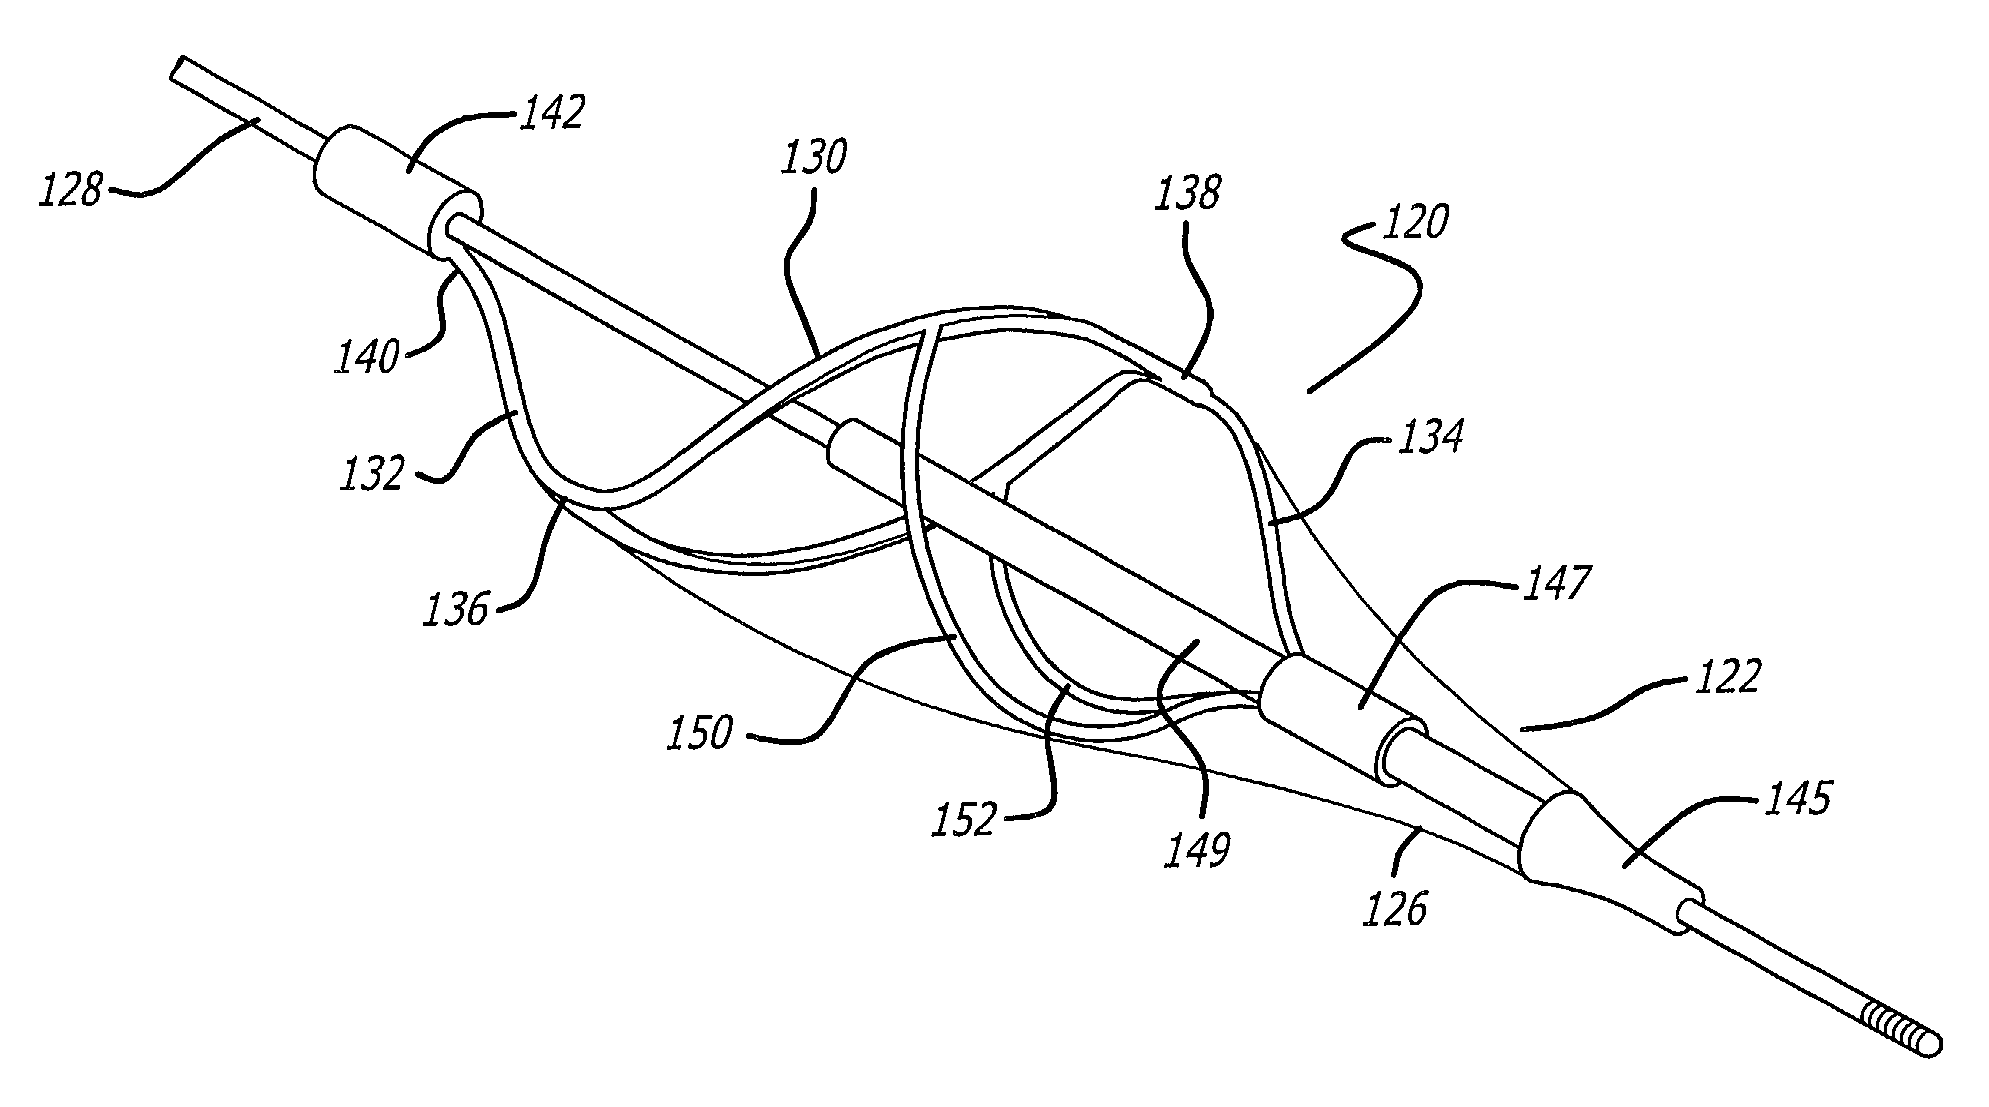 Expandable cages for embolic filtering devices